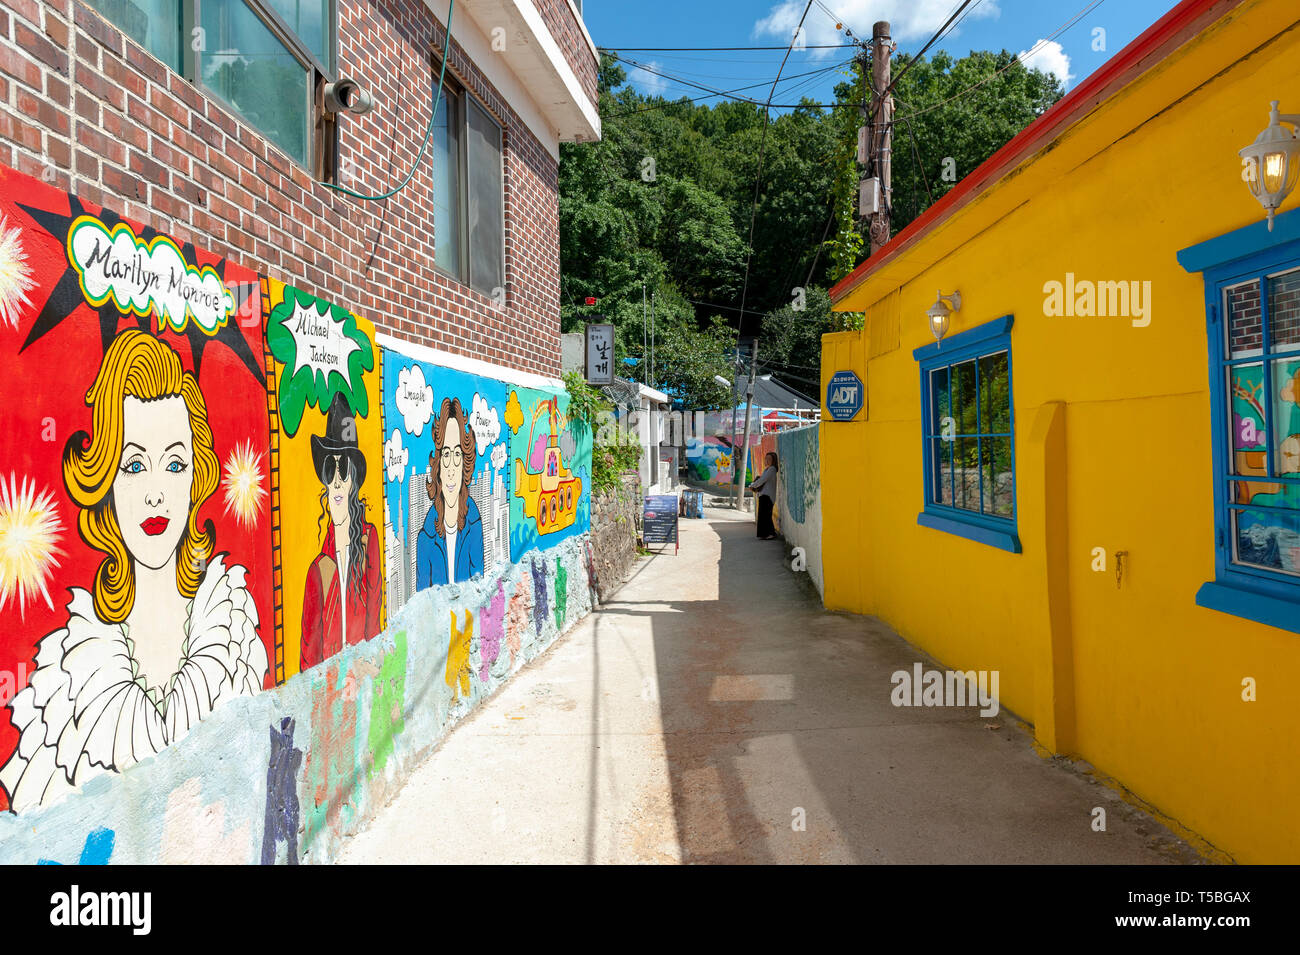 Colourful paintings and decorations on walls and buildings at Jaman Mural Village, located near Jeonju Hanok Village in Jeonju, South Korea Stock Photo